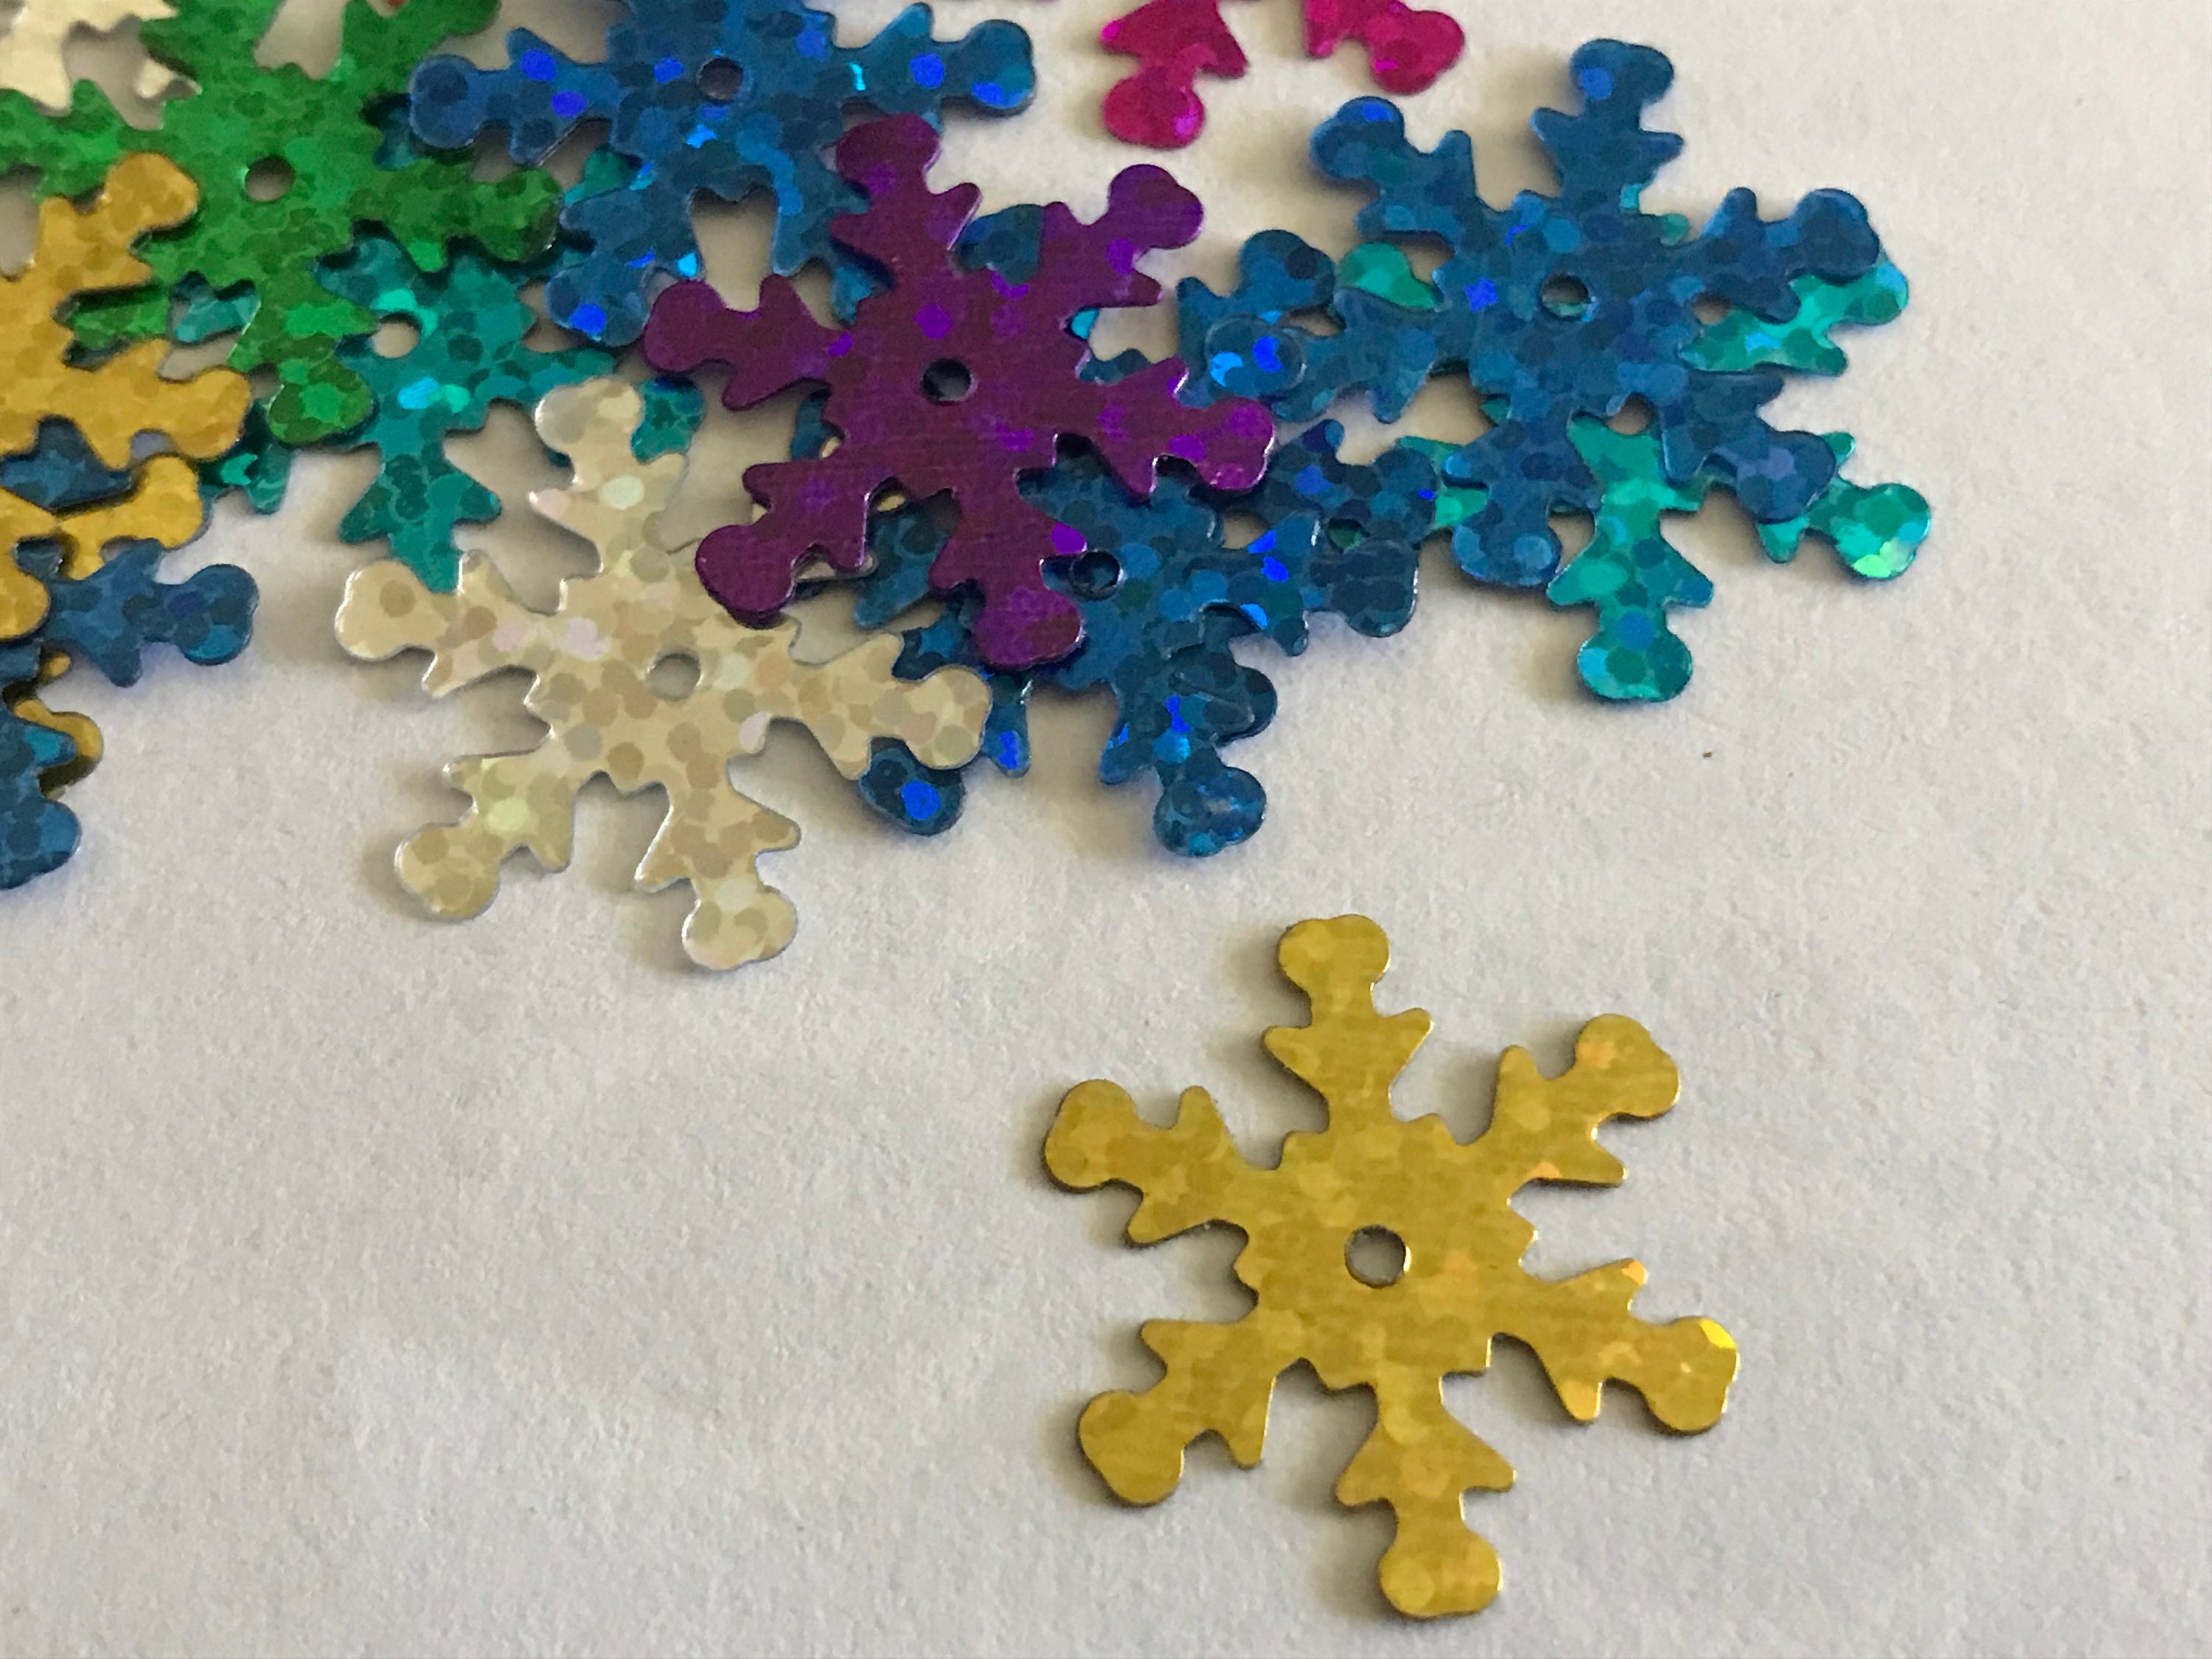 BUY 1 GET 1 FREE Mixed Snowflake Sequins X 20g. Festive, Holiday Sequins.  Mixed Snowflakes. Christmas Crafts. Mixed Colours and Sizes. 